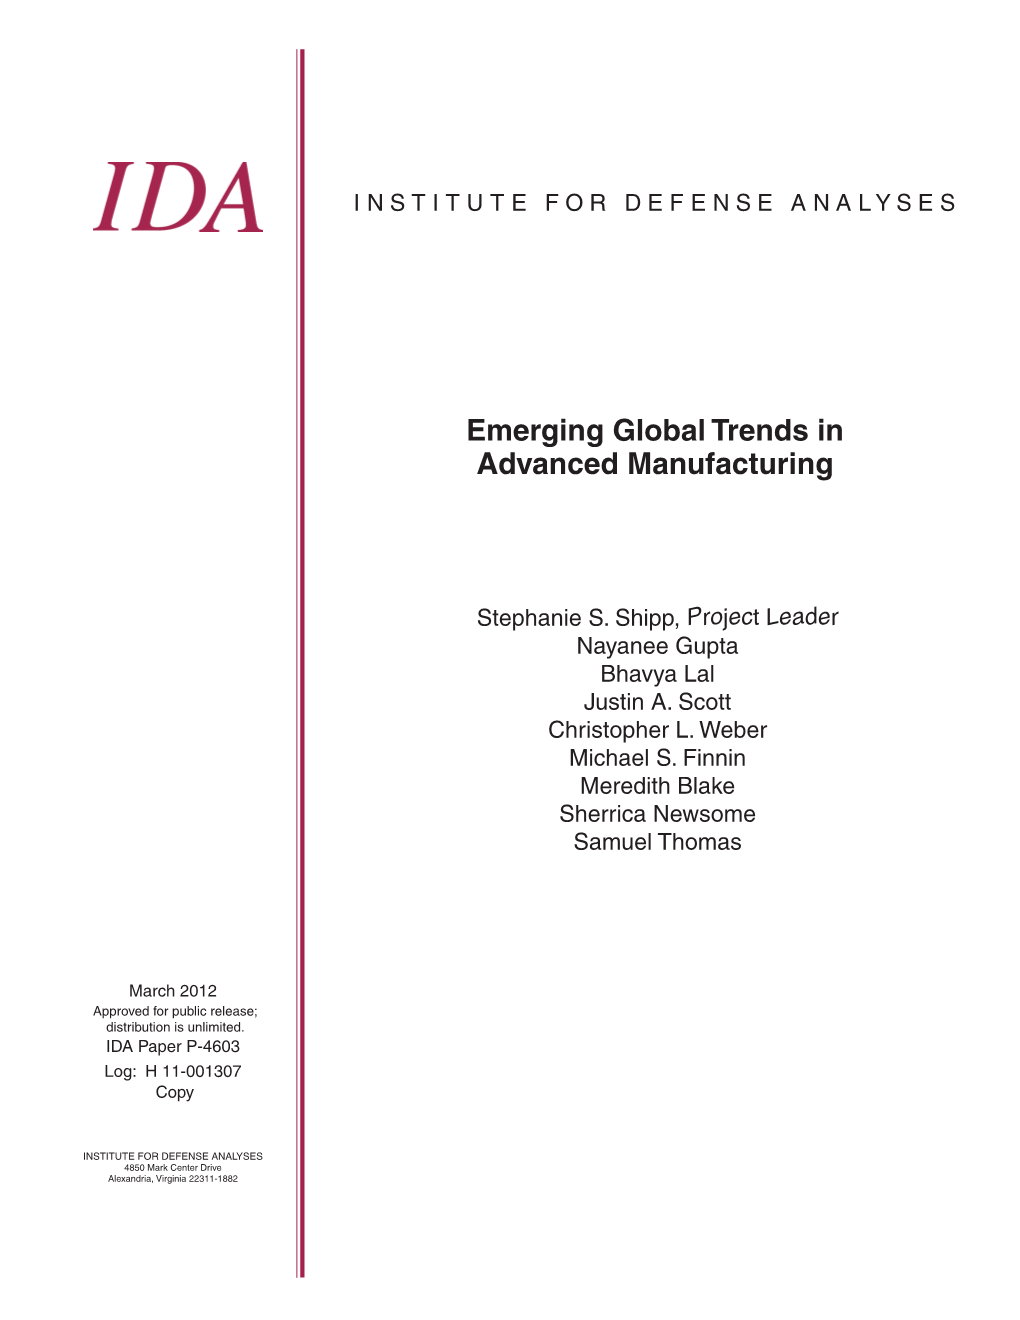 Emerging Global Trends in Advanced Manufacturing